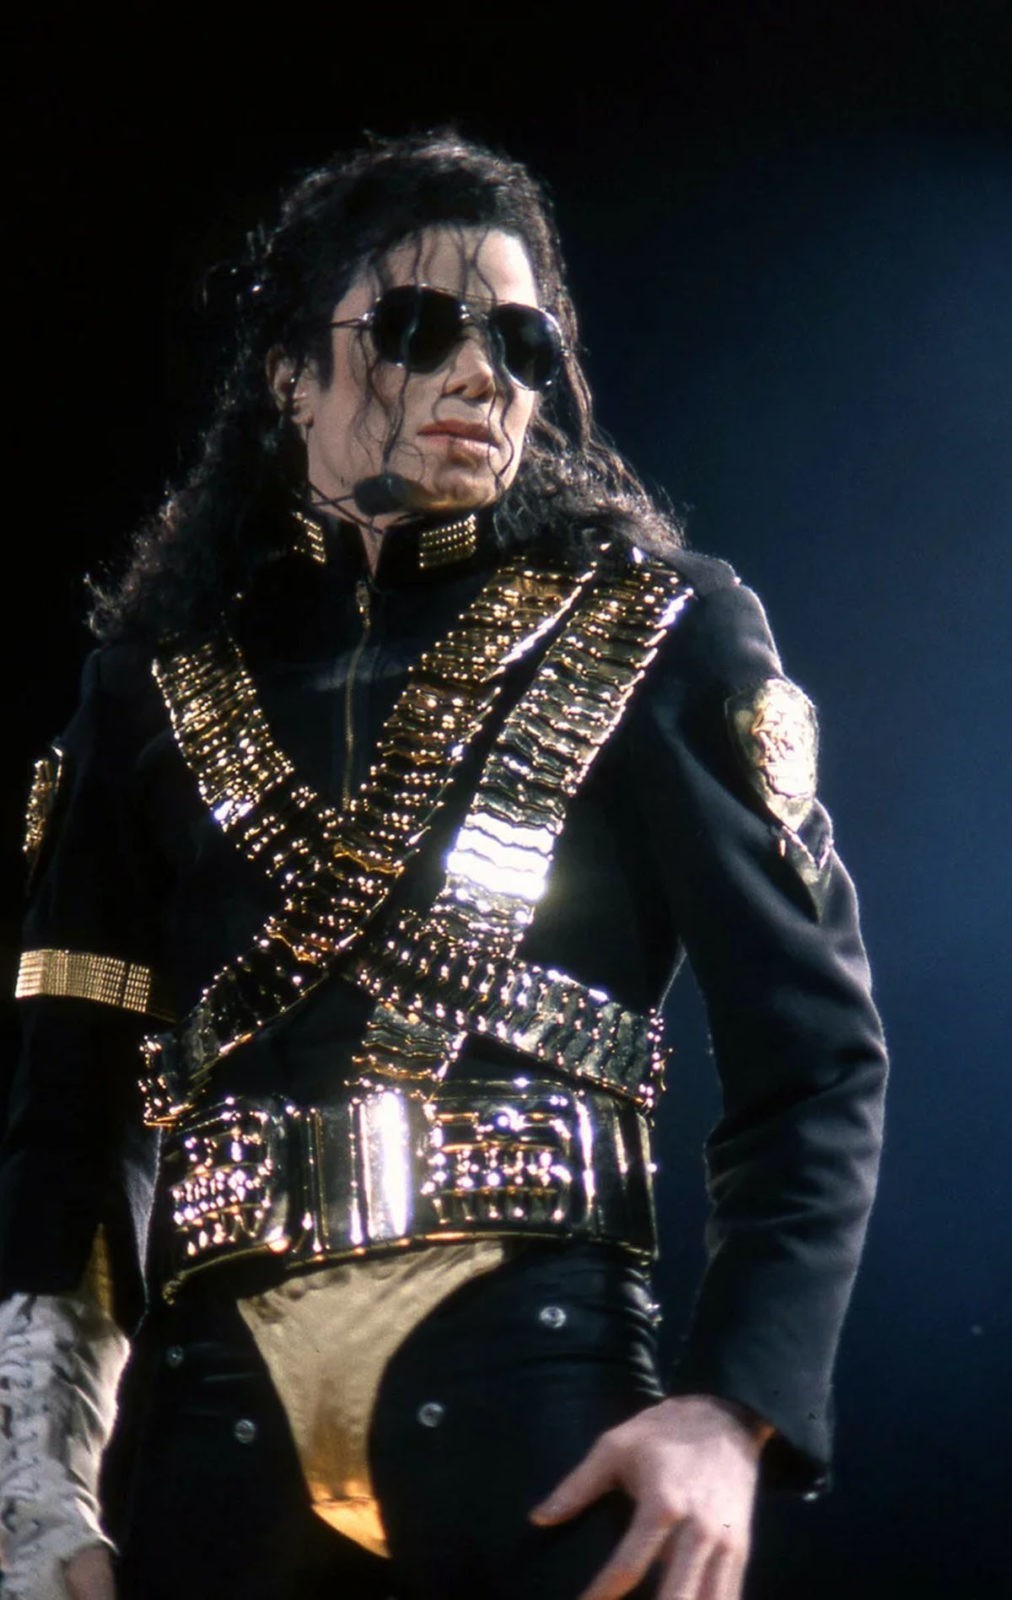 One of the images of Michael Jackson at a concert in Luzhniki.